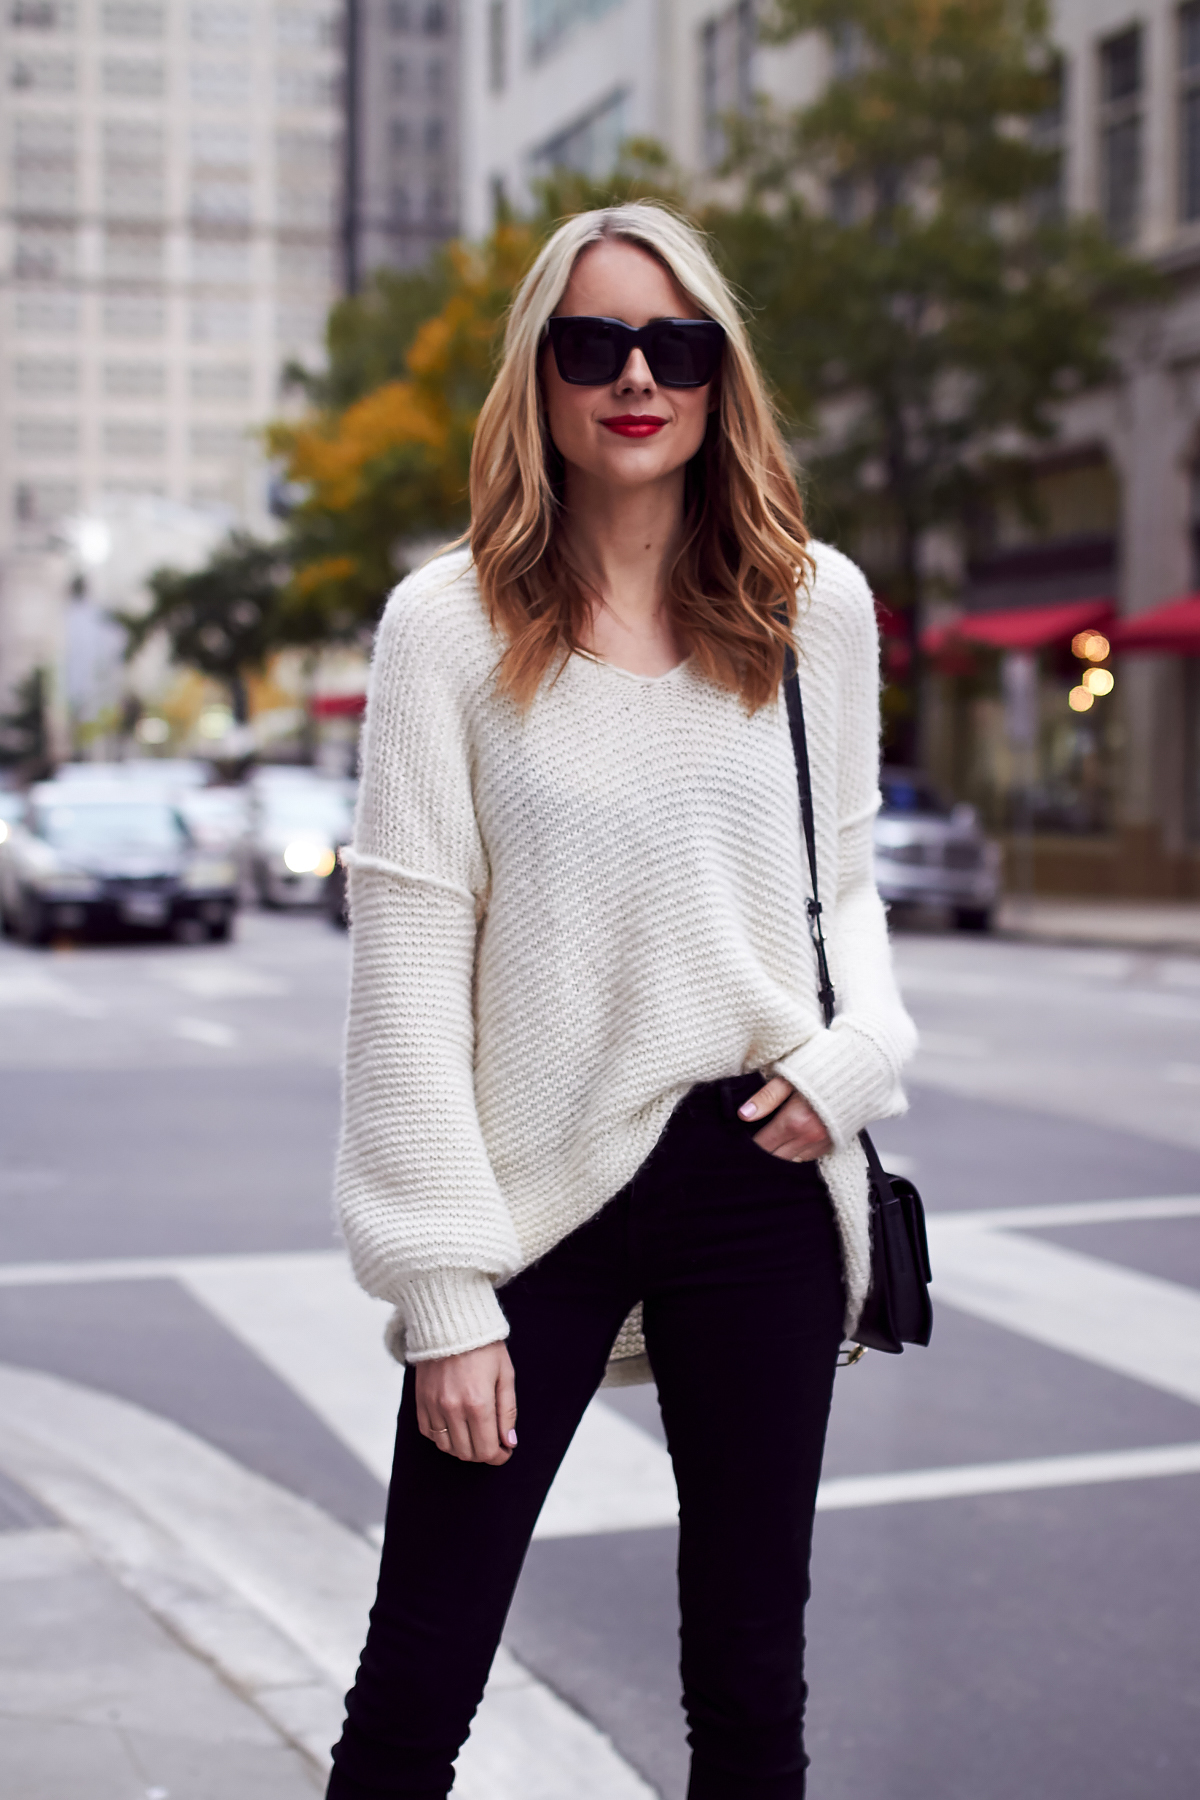 Fall Outfit, Winter Outfit, Ivory Sweater, Black Skinny Jeans, Chloe Faye Handbag, Red Lipstick